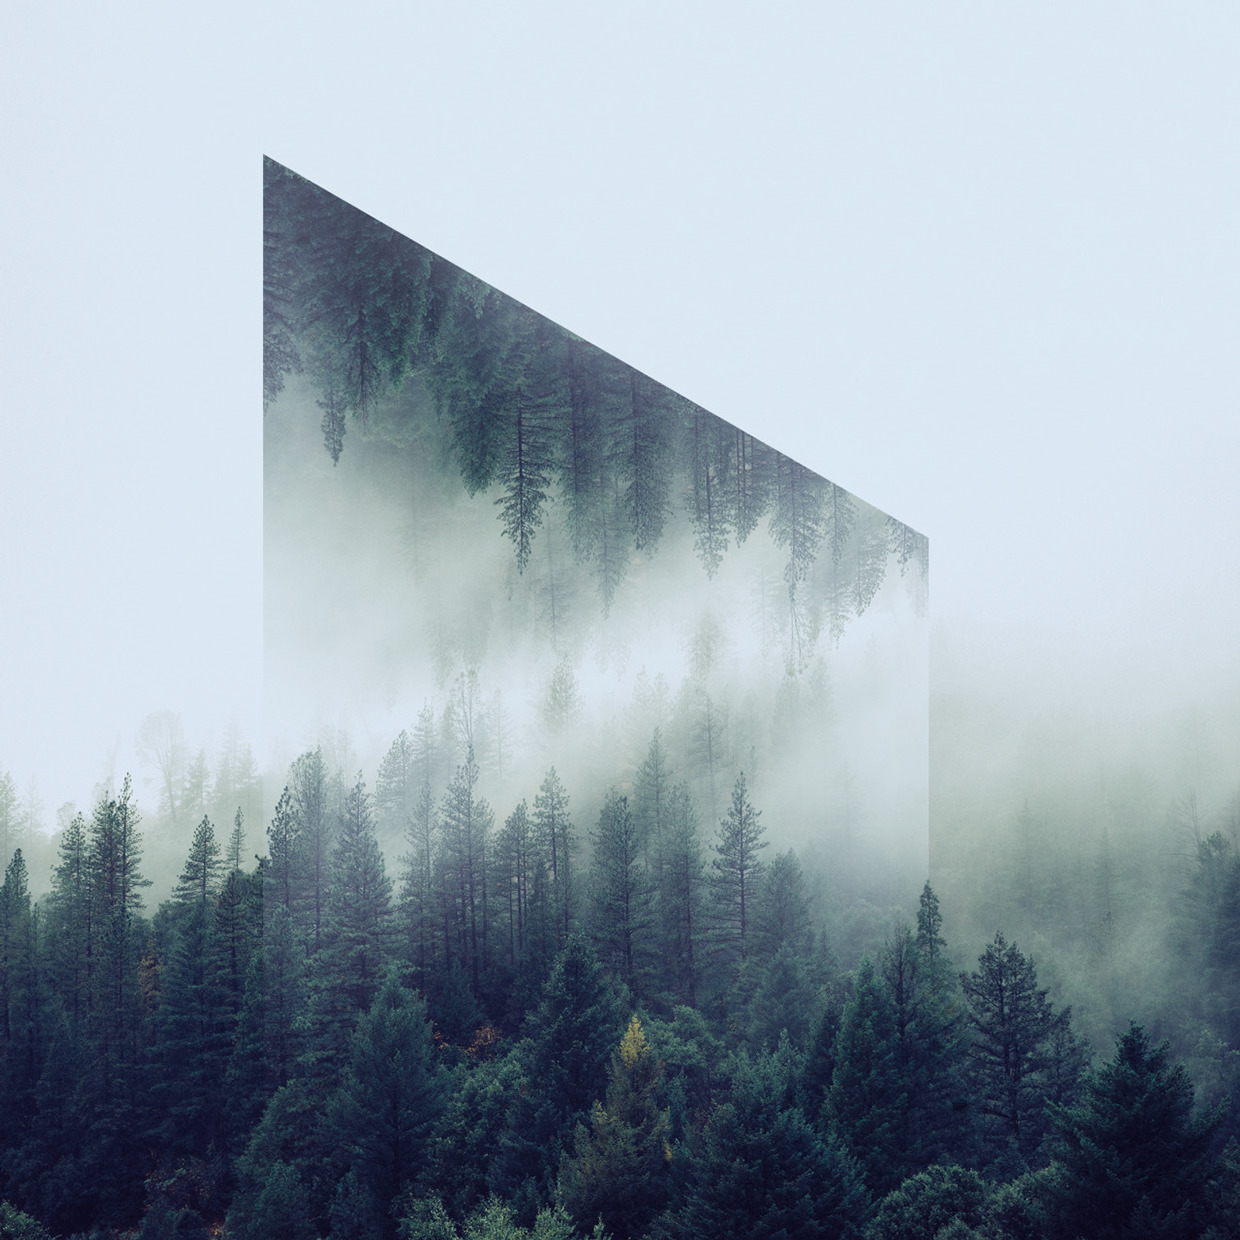 Victoria Siemer Reflected Landscapes and Creative Photo Manipulations